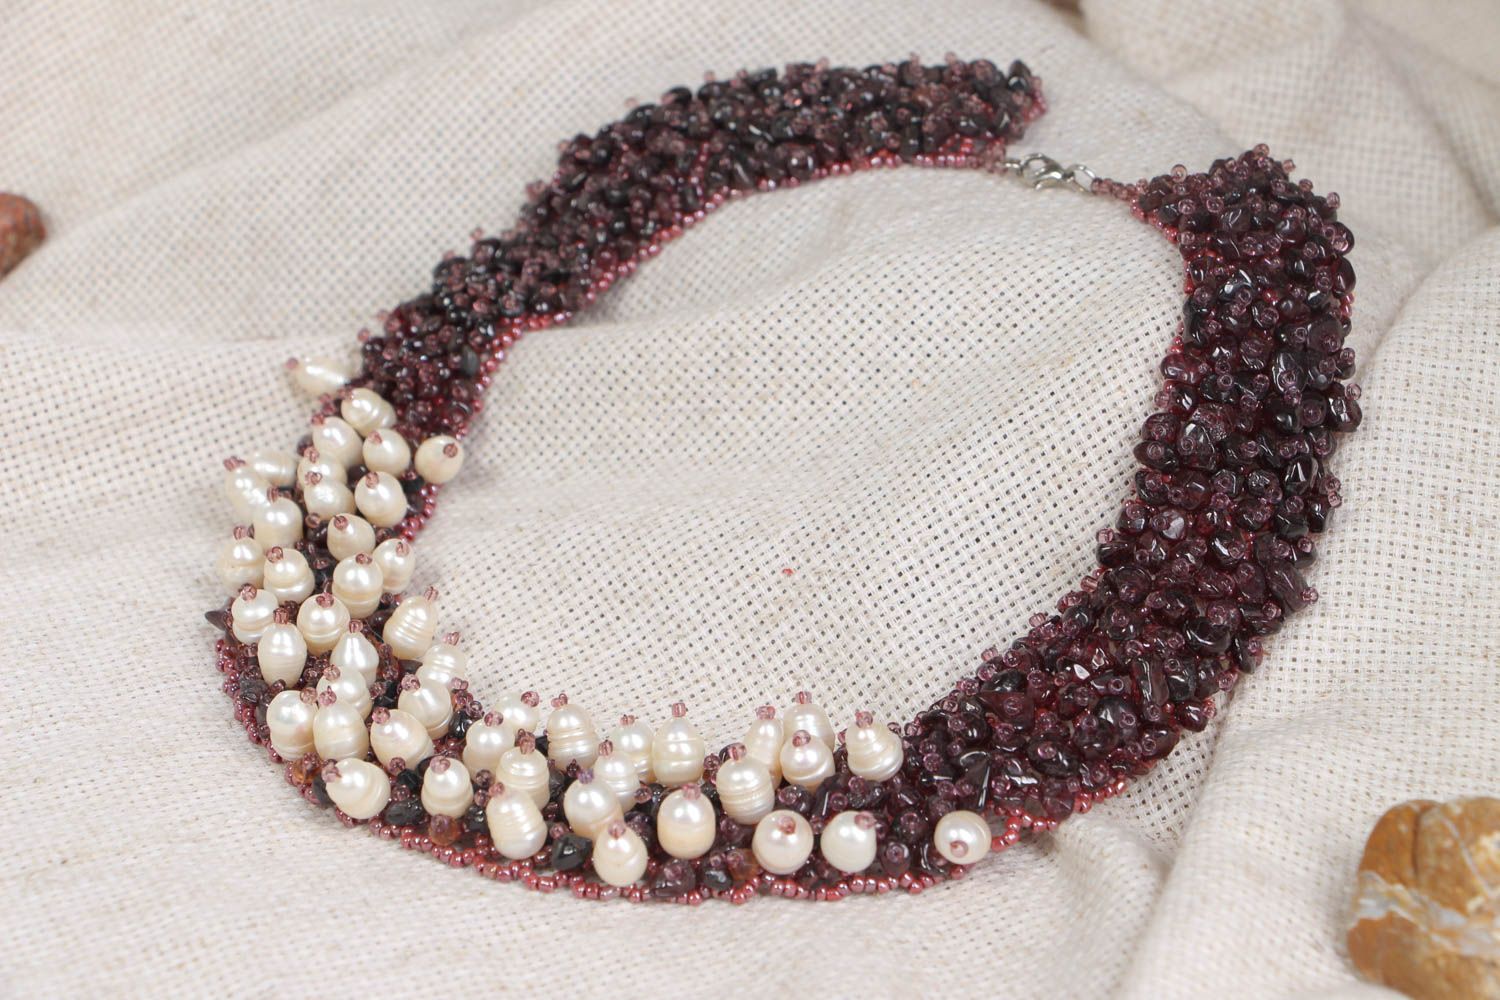 Handmade necklace accessories made of beads and river pearls cute jewelry photo 1